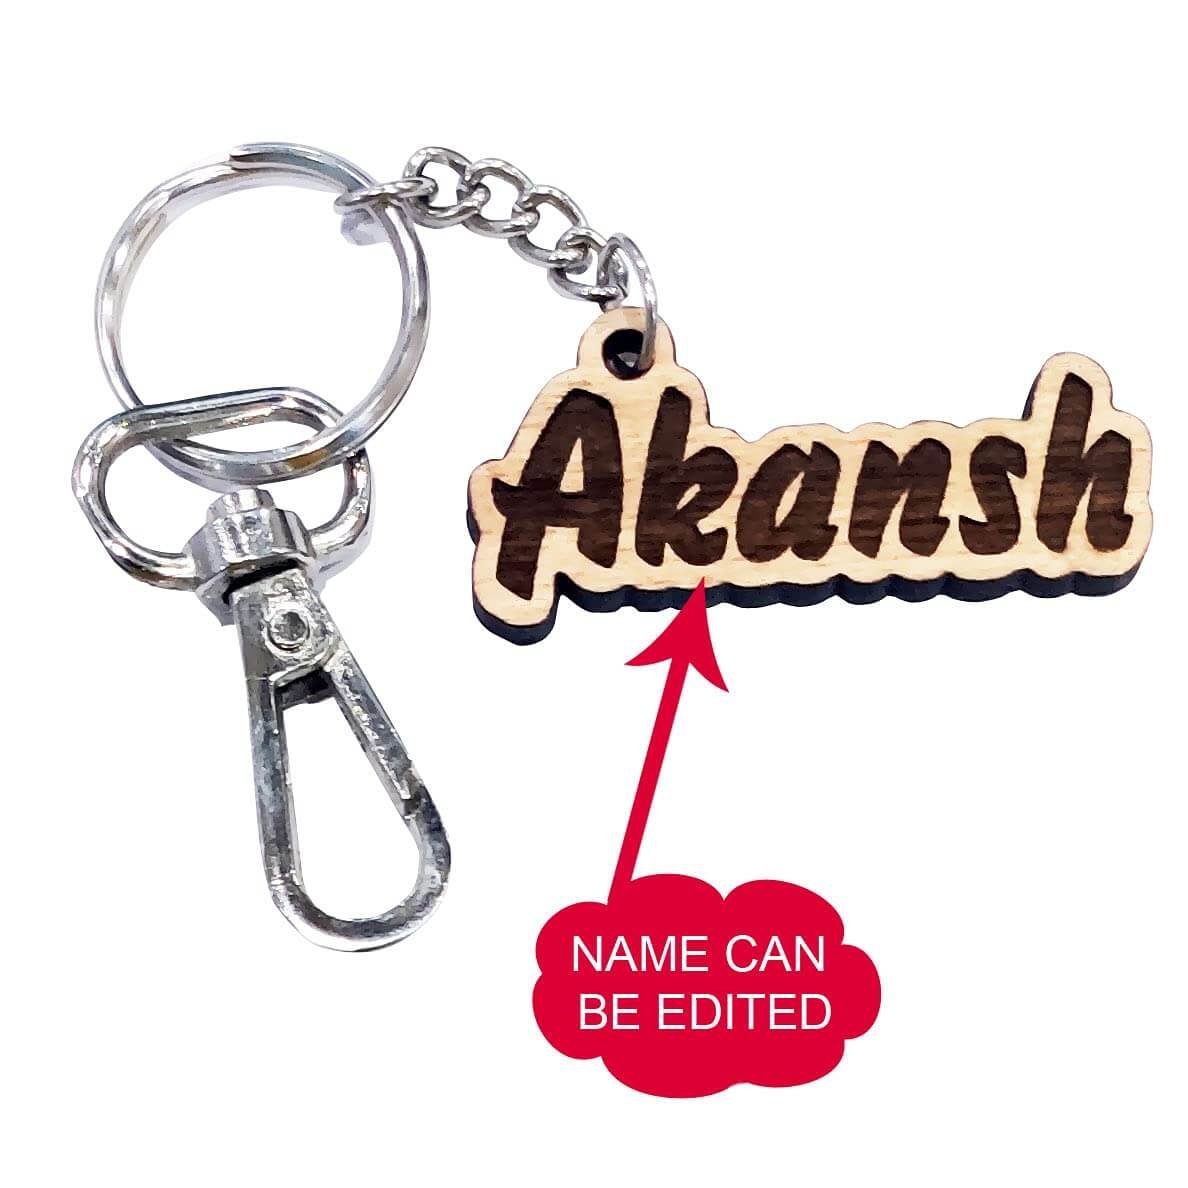 https://shoppingyatra.com/product_images/Customized Name Keychain for Girls or Boys - Personalized Wooden Key Chain with Name Tag Written (Wood)3.jpg